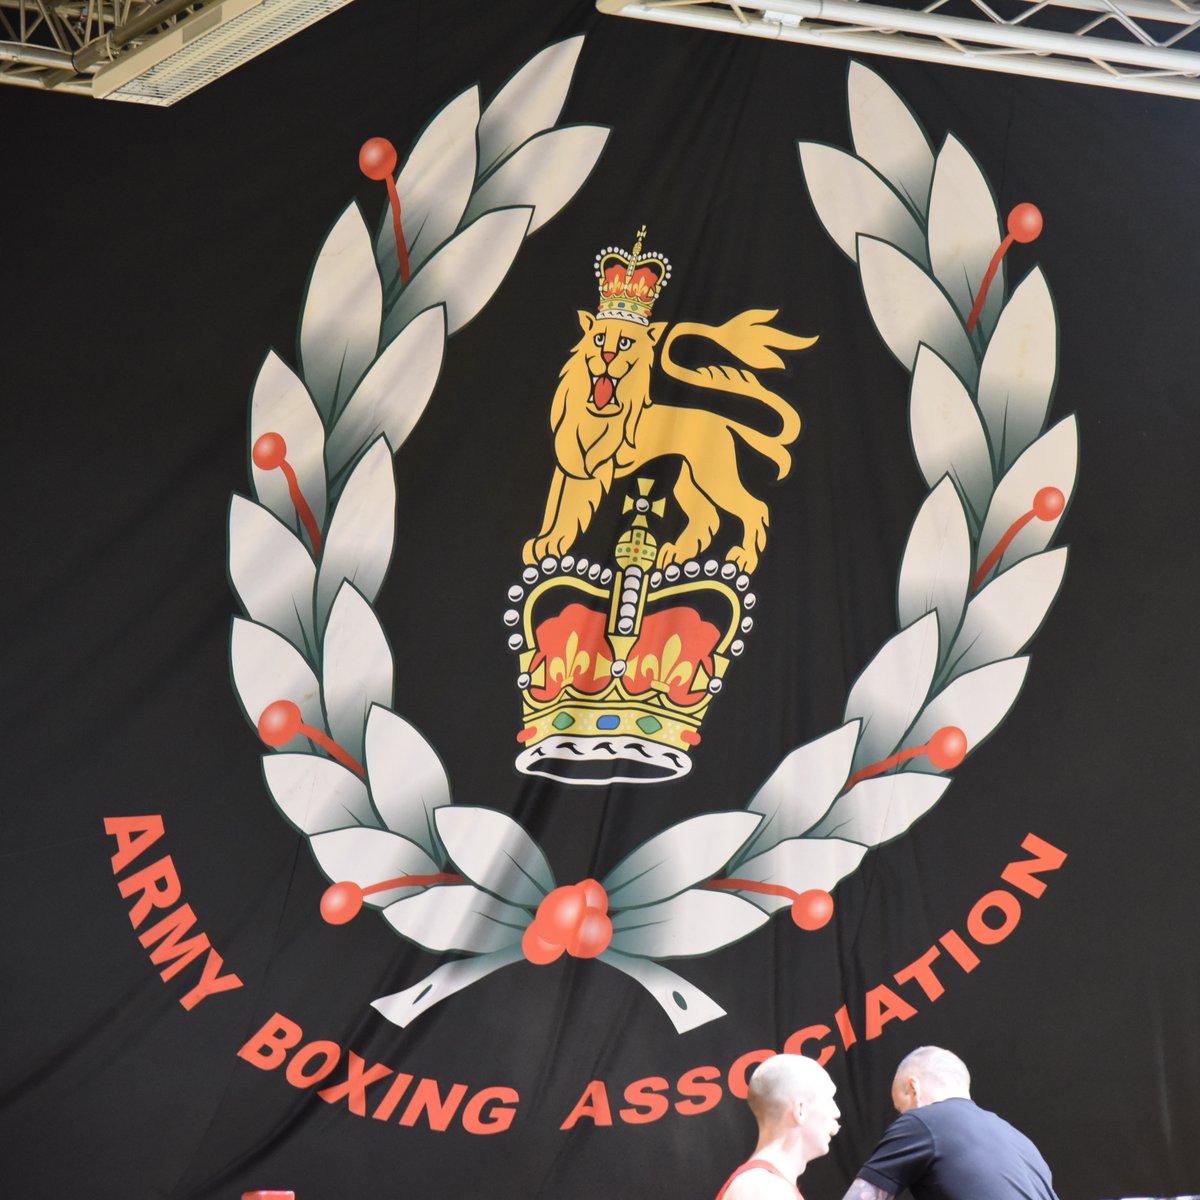 I would like to wish all of those in our #SapperFamily taking part in the @ArmySportASCB Boxing Open Championships Final the best of luck today! You, and the whole team, have all done the Corps proud! 🥊 youtube.com/watch?v=EgRXJS… #SapperStrong #Ubique